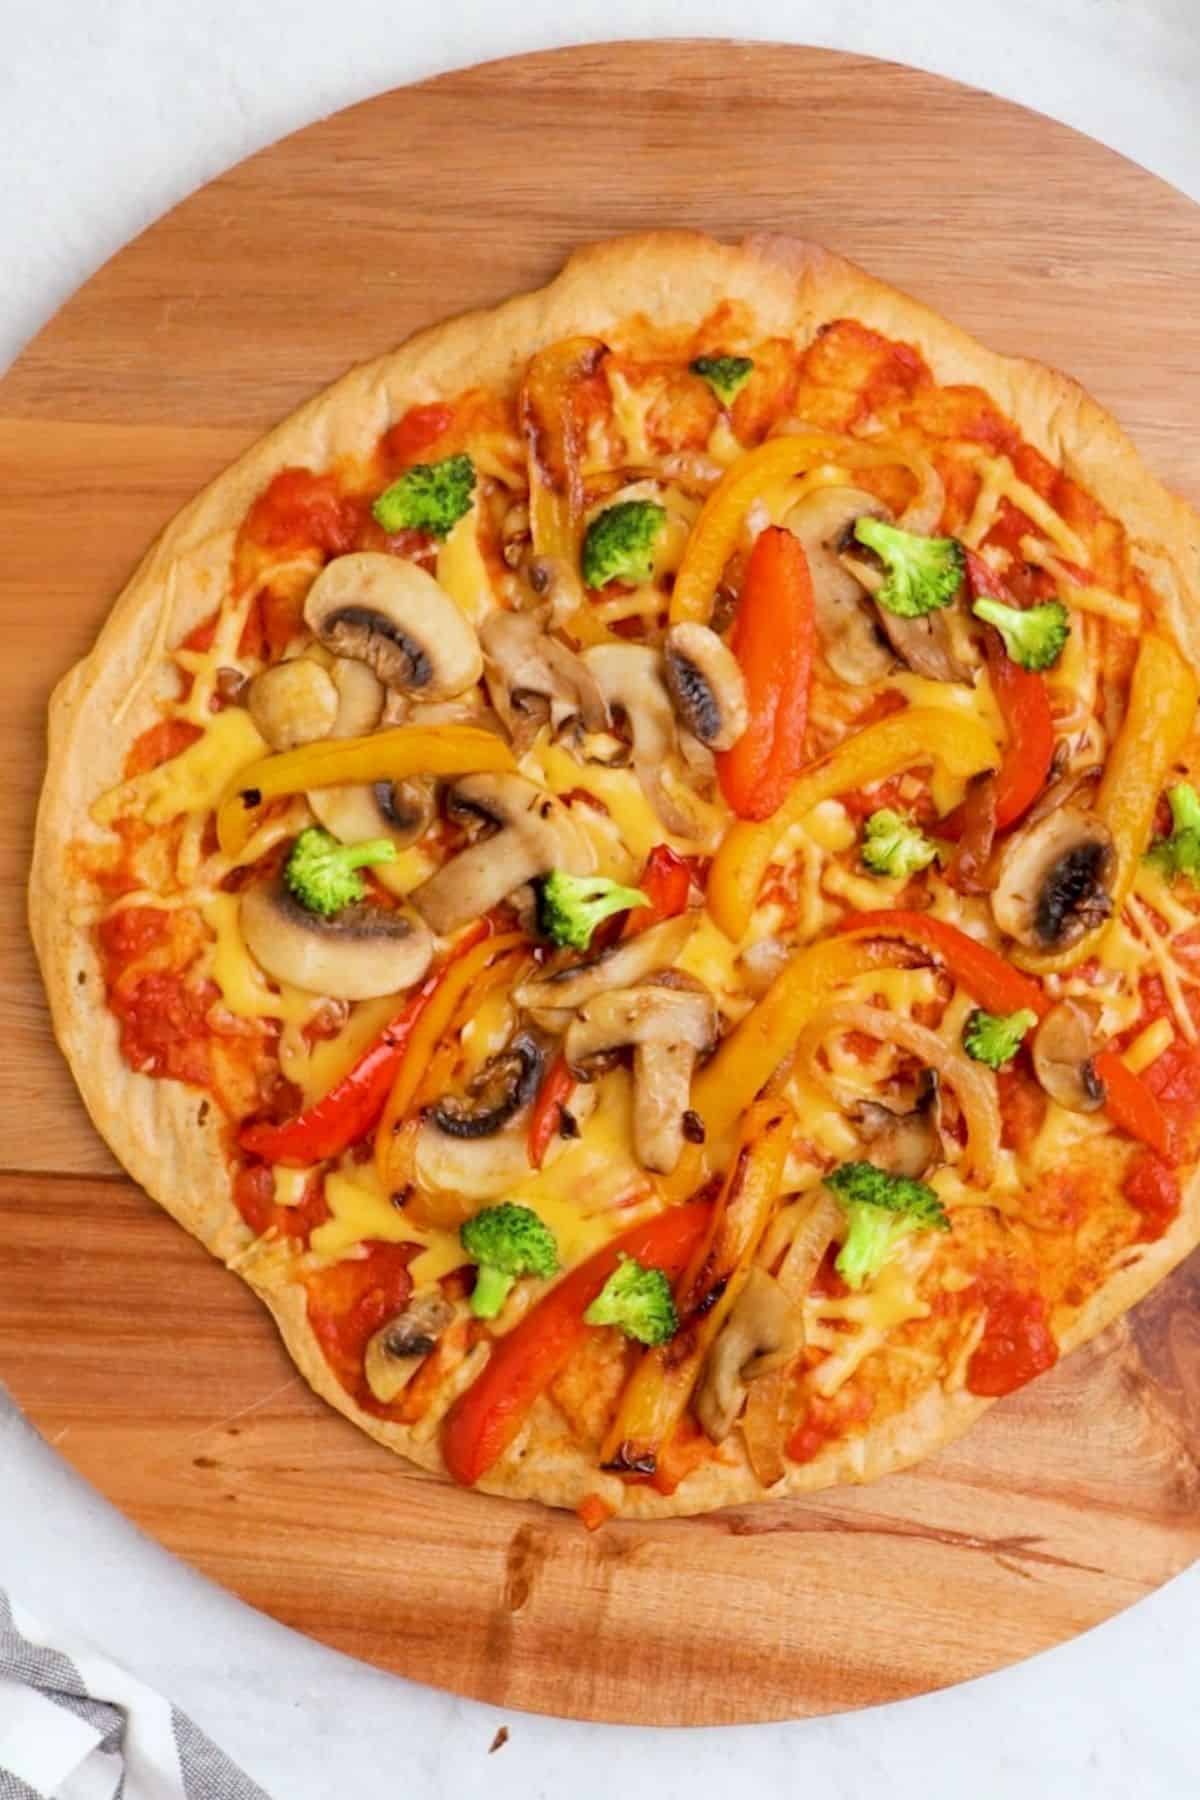 Lentil pizza crust on cutting board with sauce, cheese and grilled veggies on top.